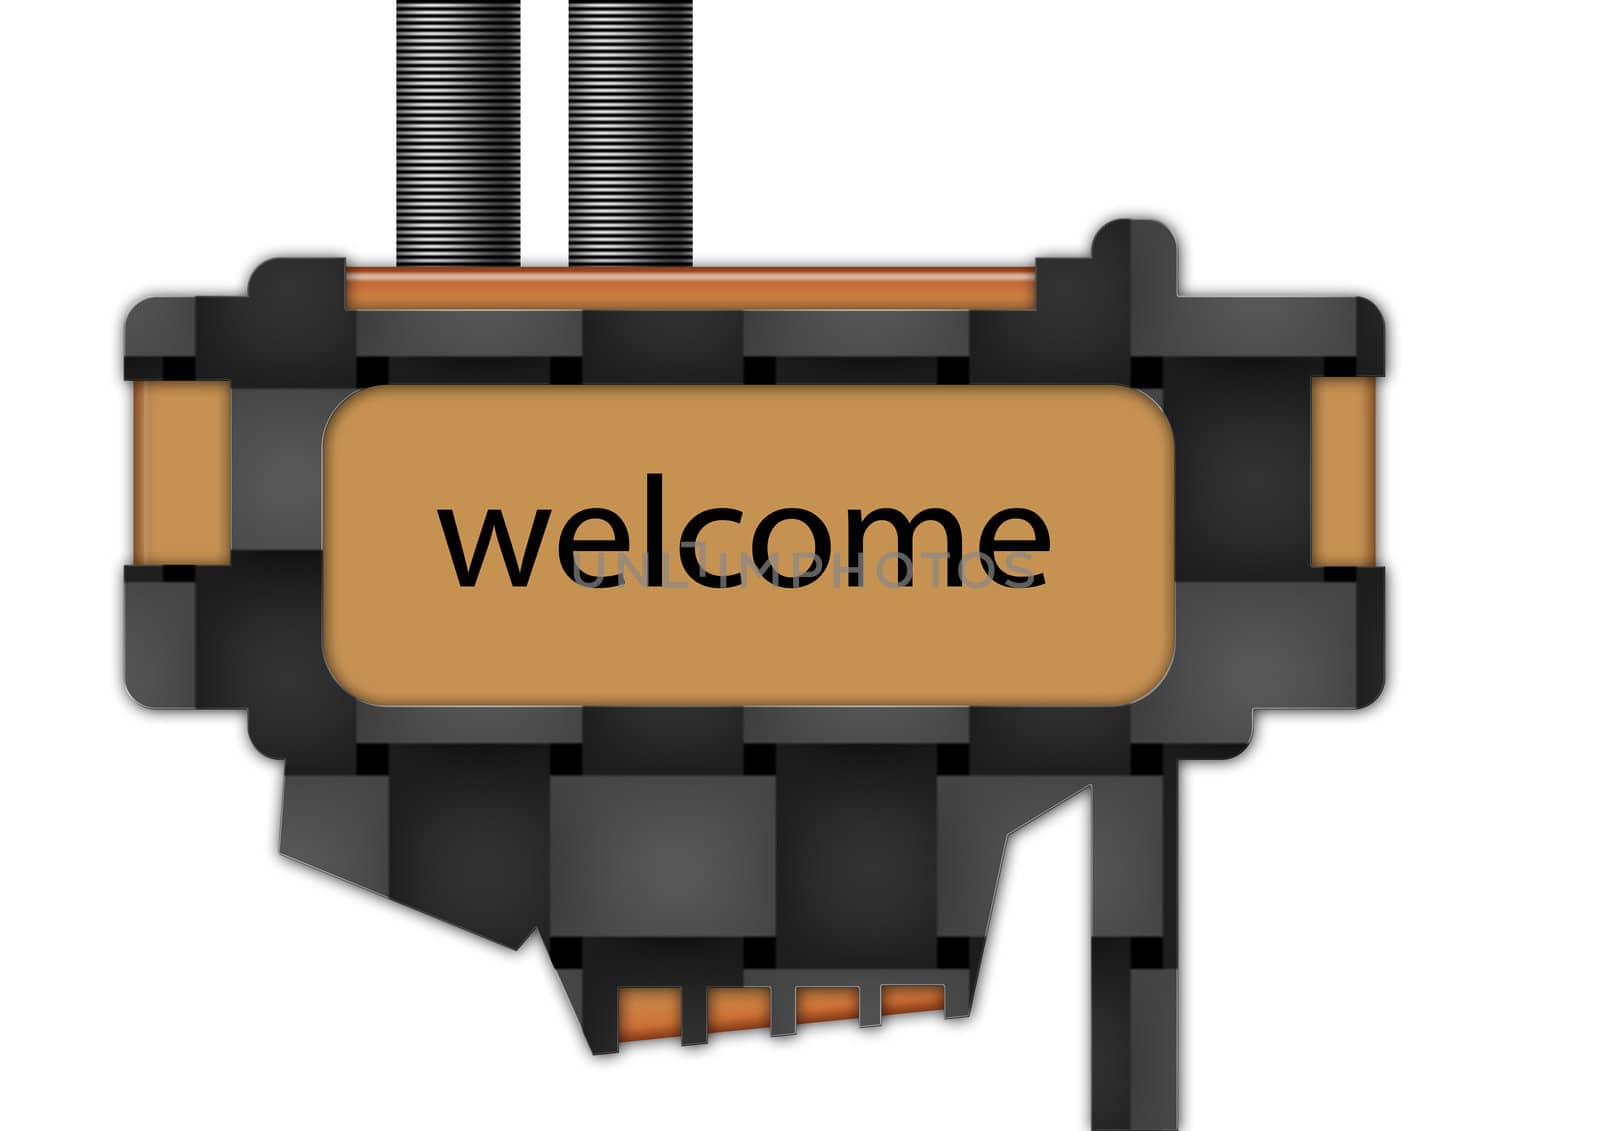 sign spelling the word "welcome"